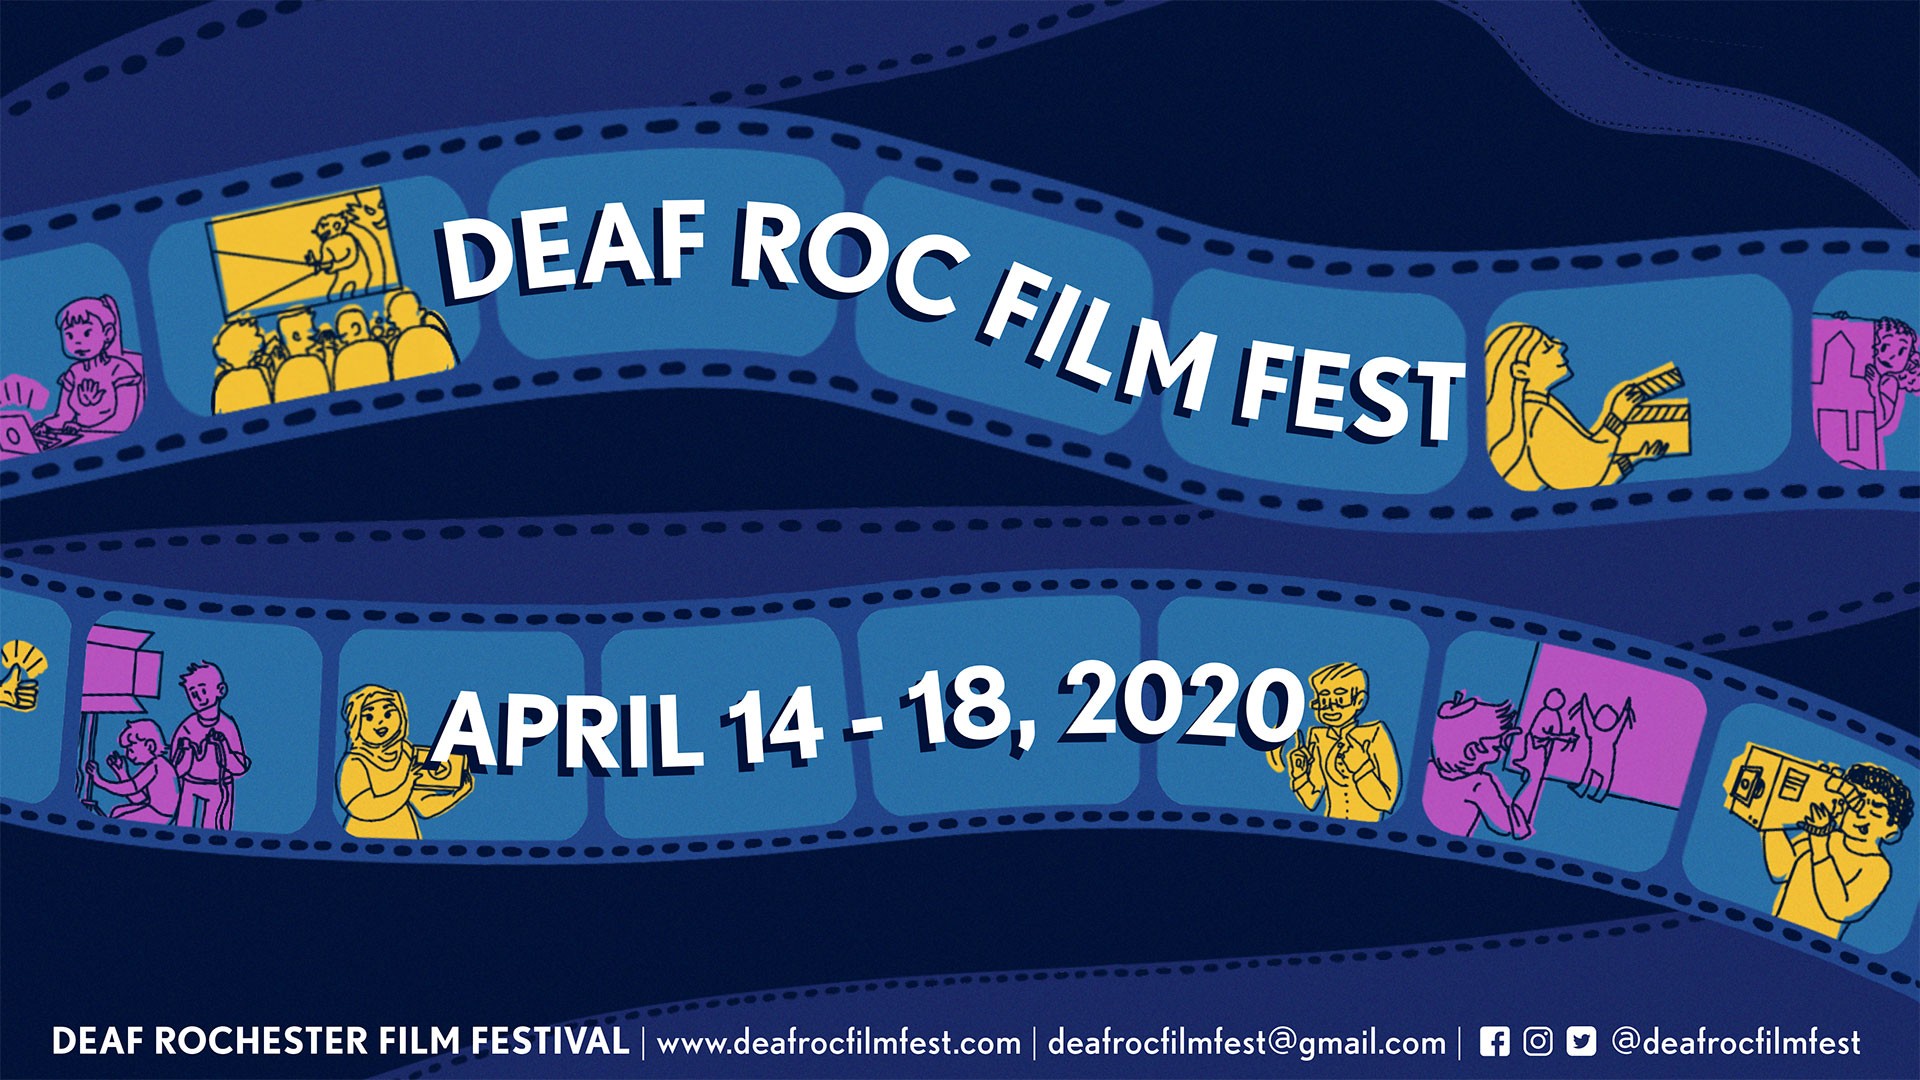 A graphic promoting the Deaf Rochester Film Festival.